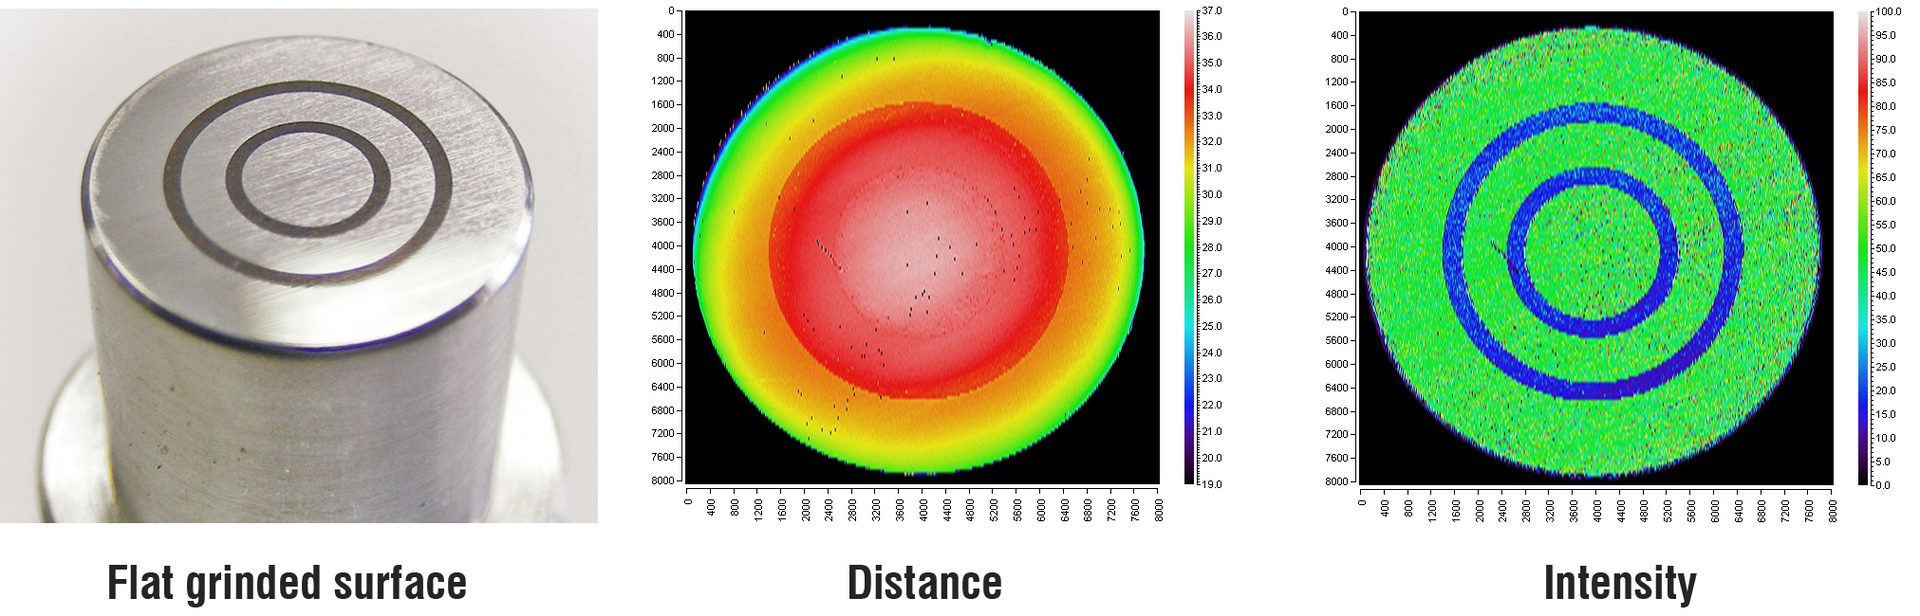 Confocal chromatic sensors gauge distances with high accuracy but can also reveal fine surface details and material differences by measuring signal intensity.